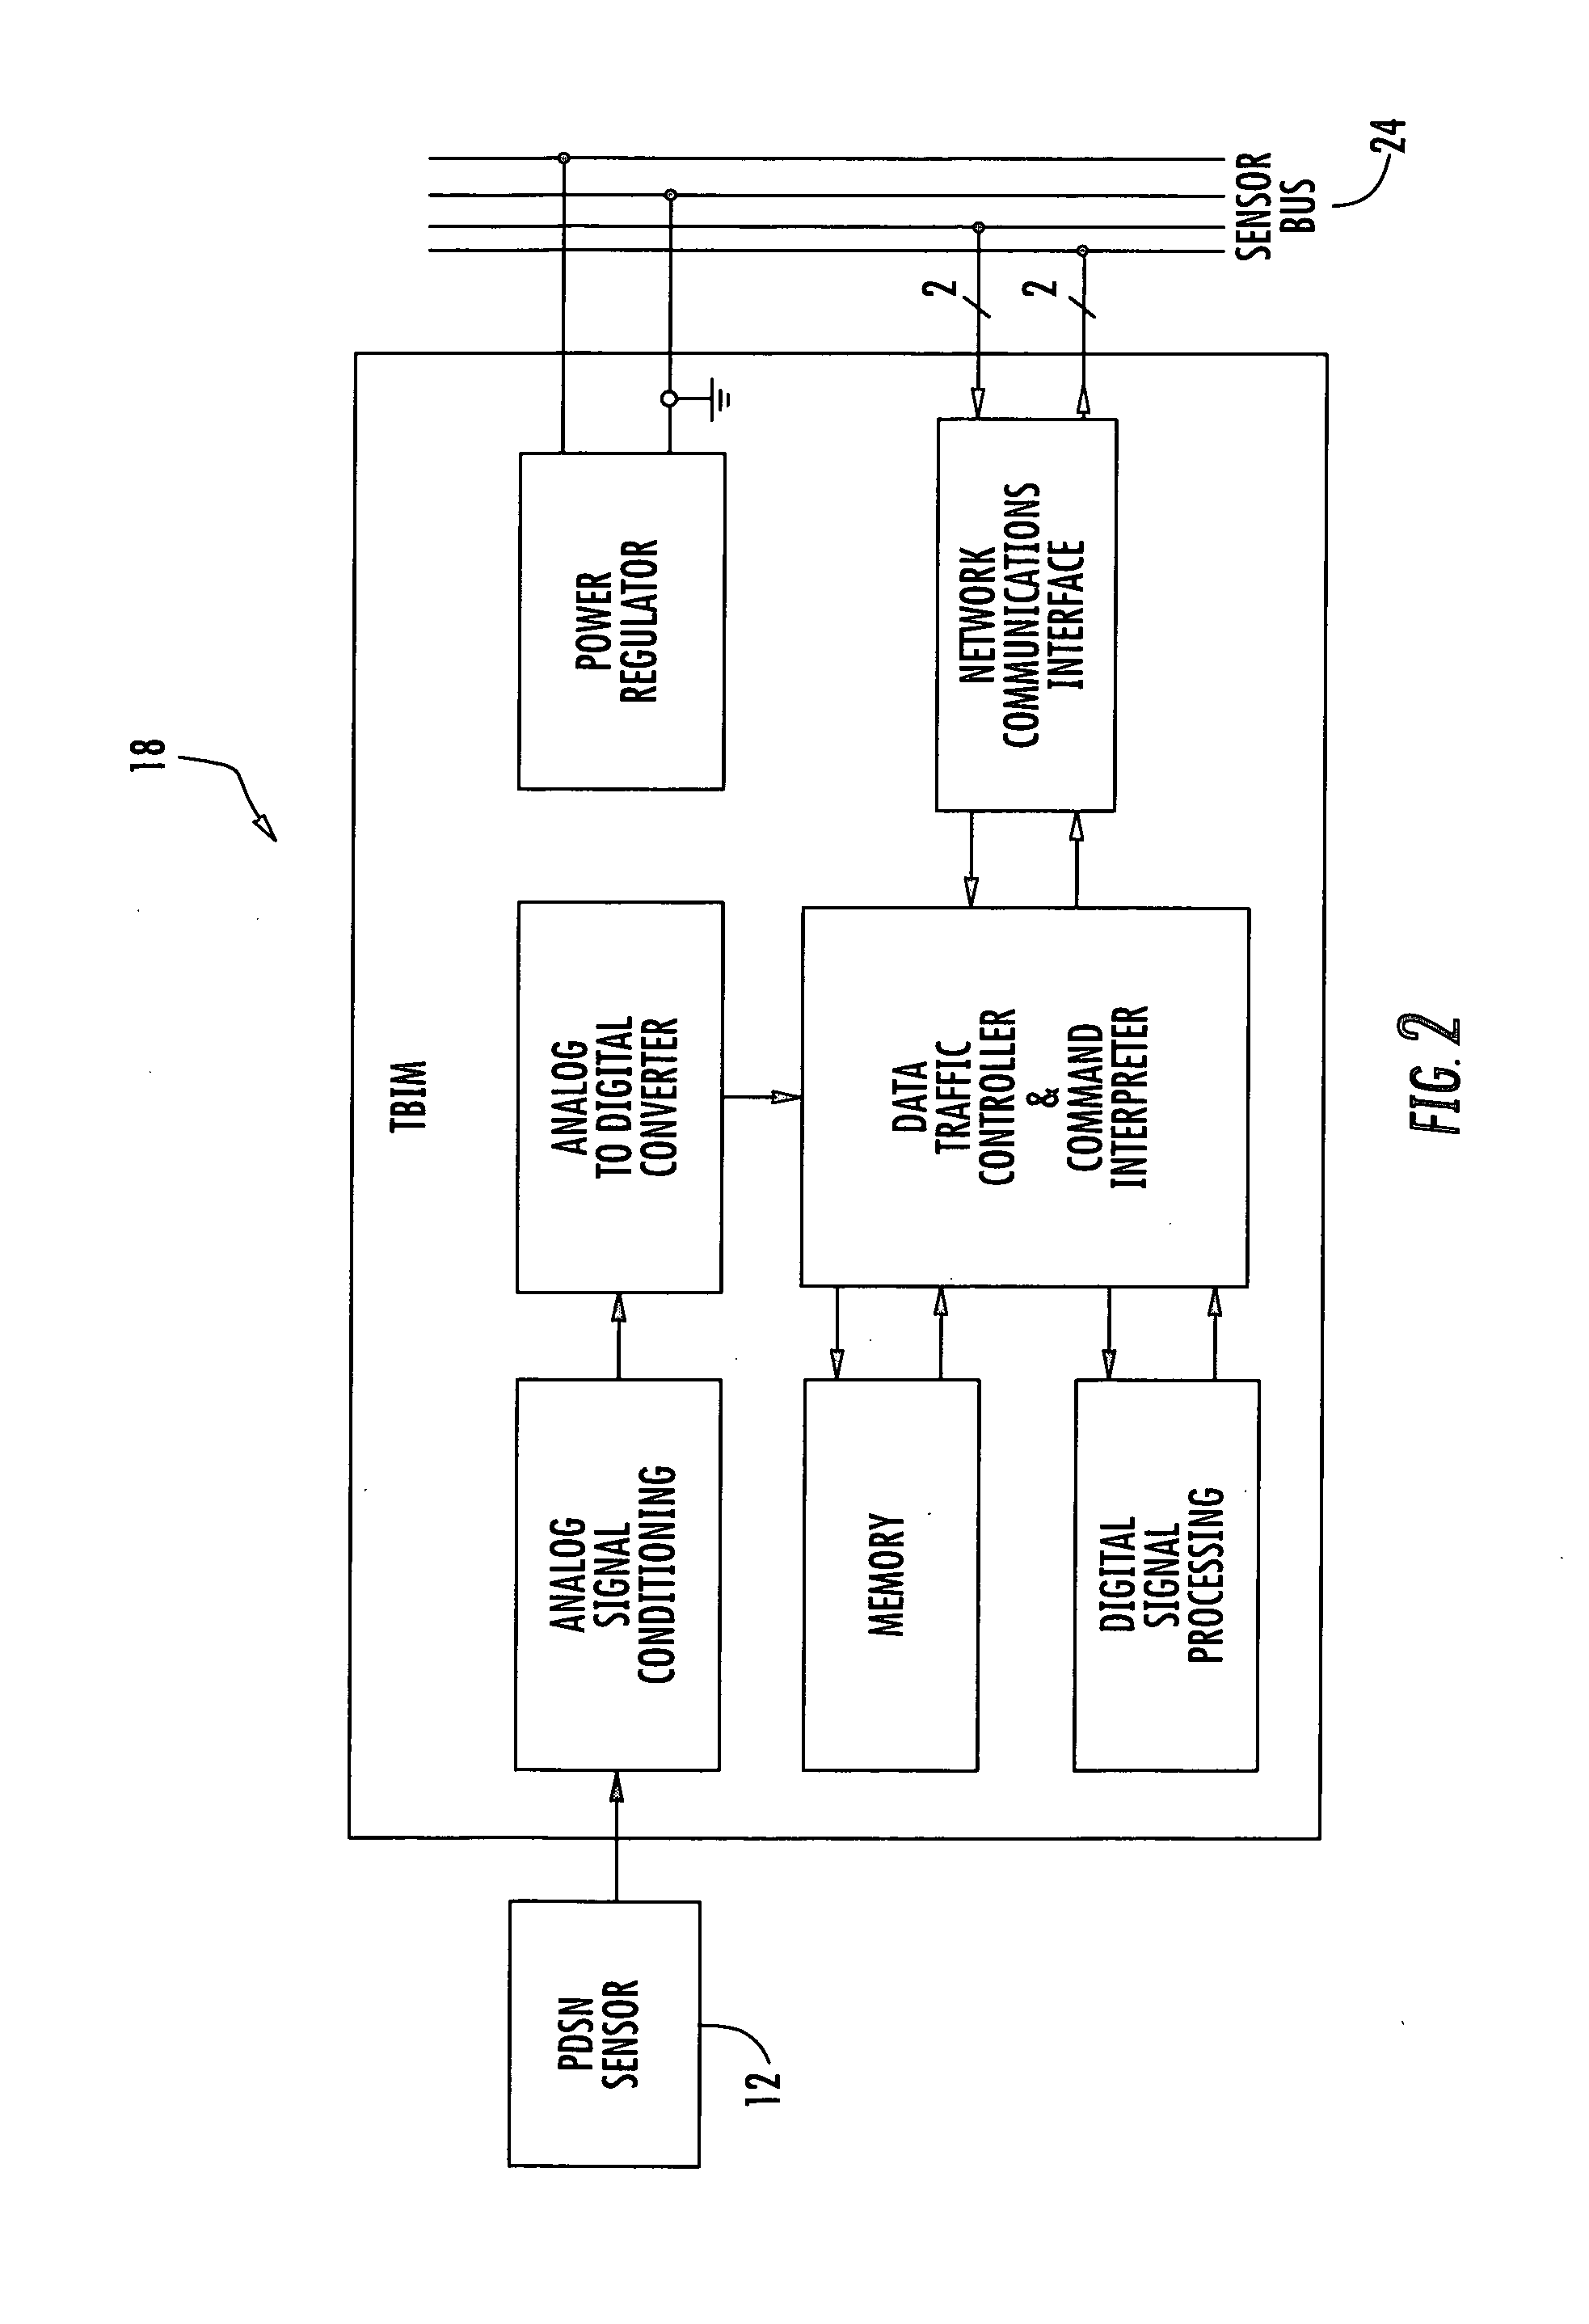 Systems, methods and computer program products for characterizing structural events